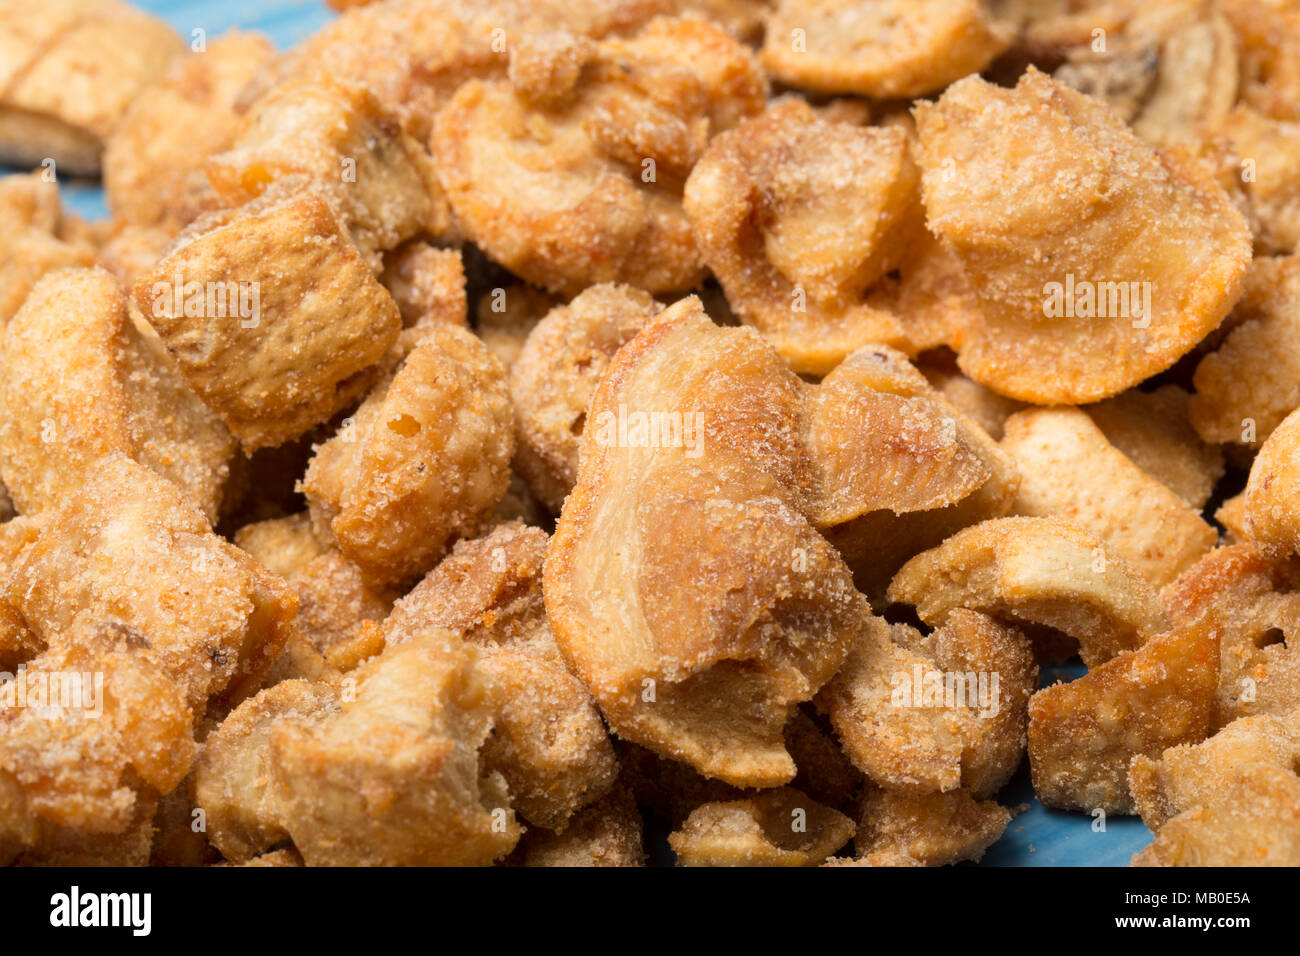 Pork scratchings from a packet bought in a supermarket. UK Stock Photo